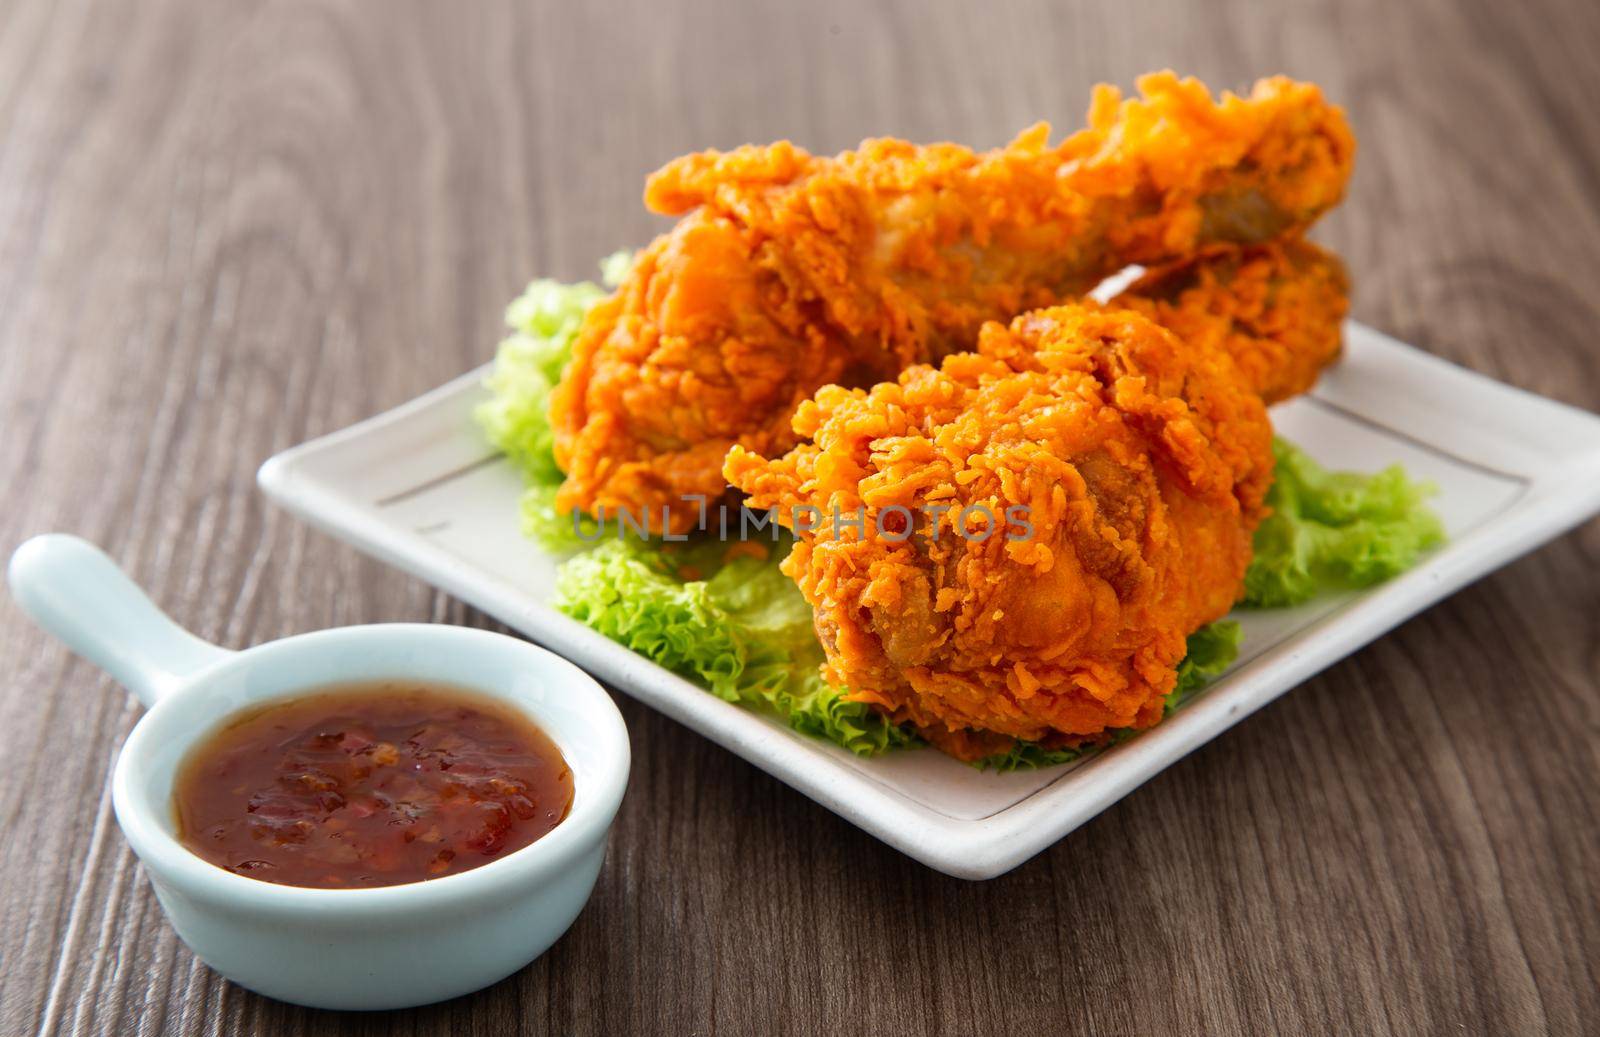 crispy and golden fried chickens by tehcheesiong